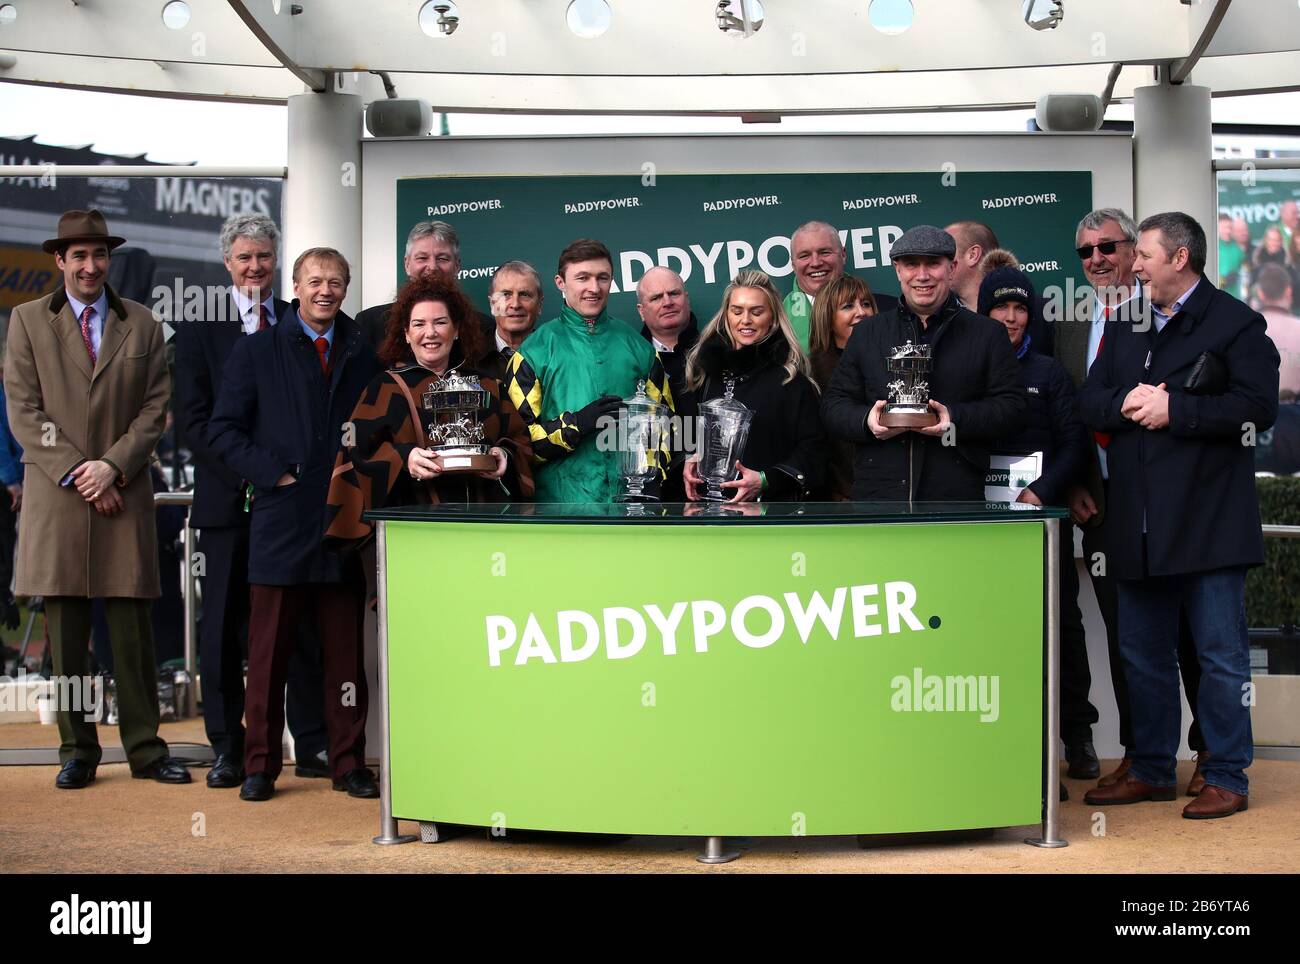 Jockey Adam Wedge celebrates winning the Paddy Power Stayers' Hurdle with trainer Rebecca Curtis and winning connections during day three of the Cheltenham Festival at Cheltenham Racecourse. Stock Photo